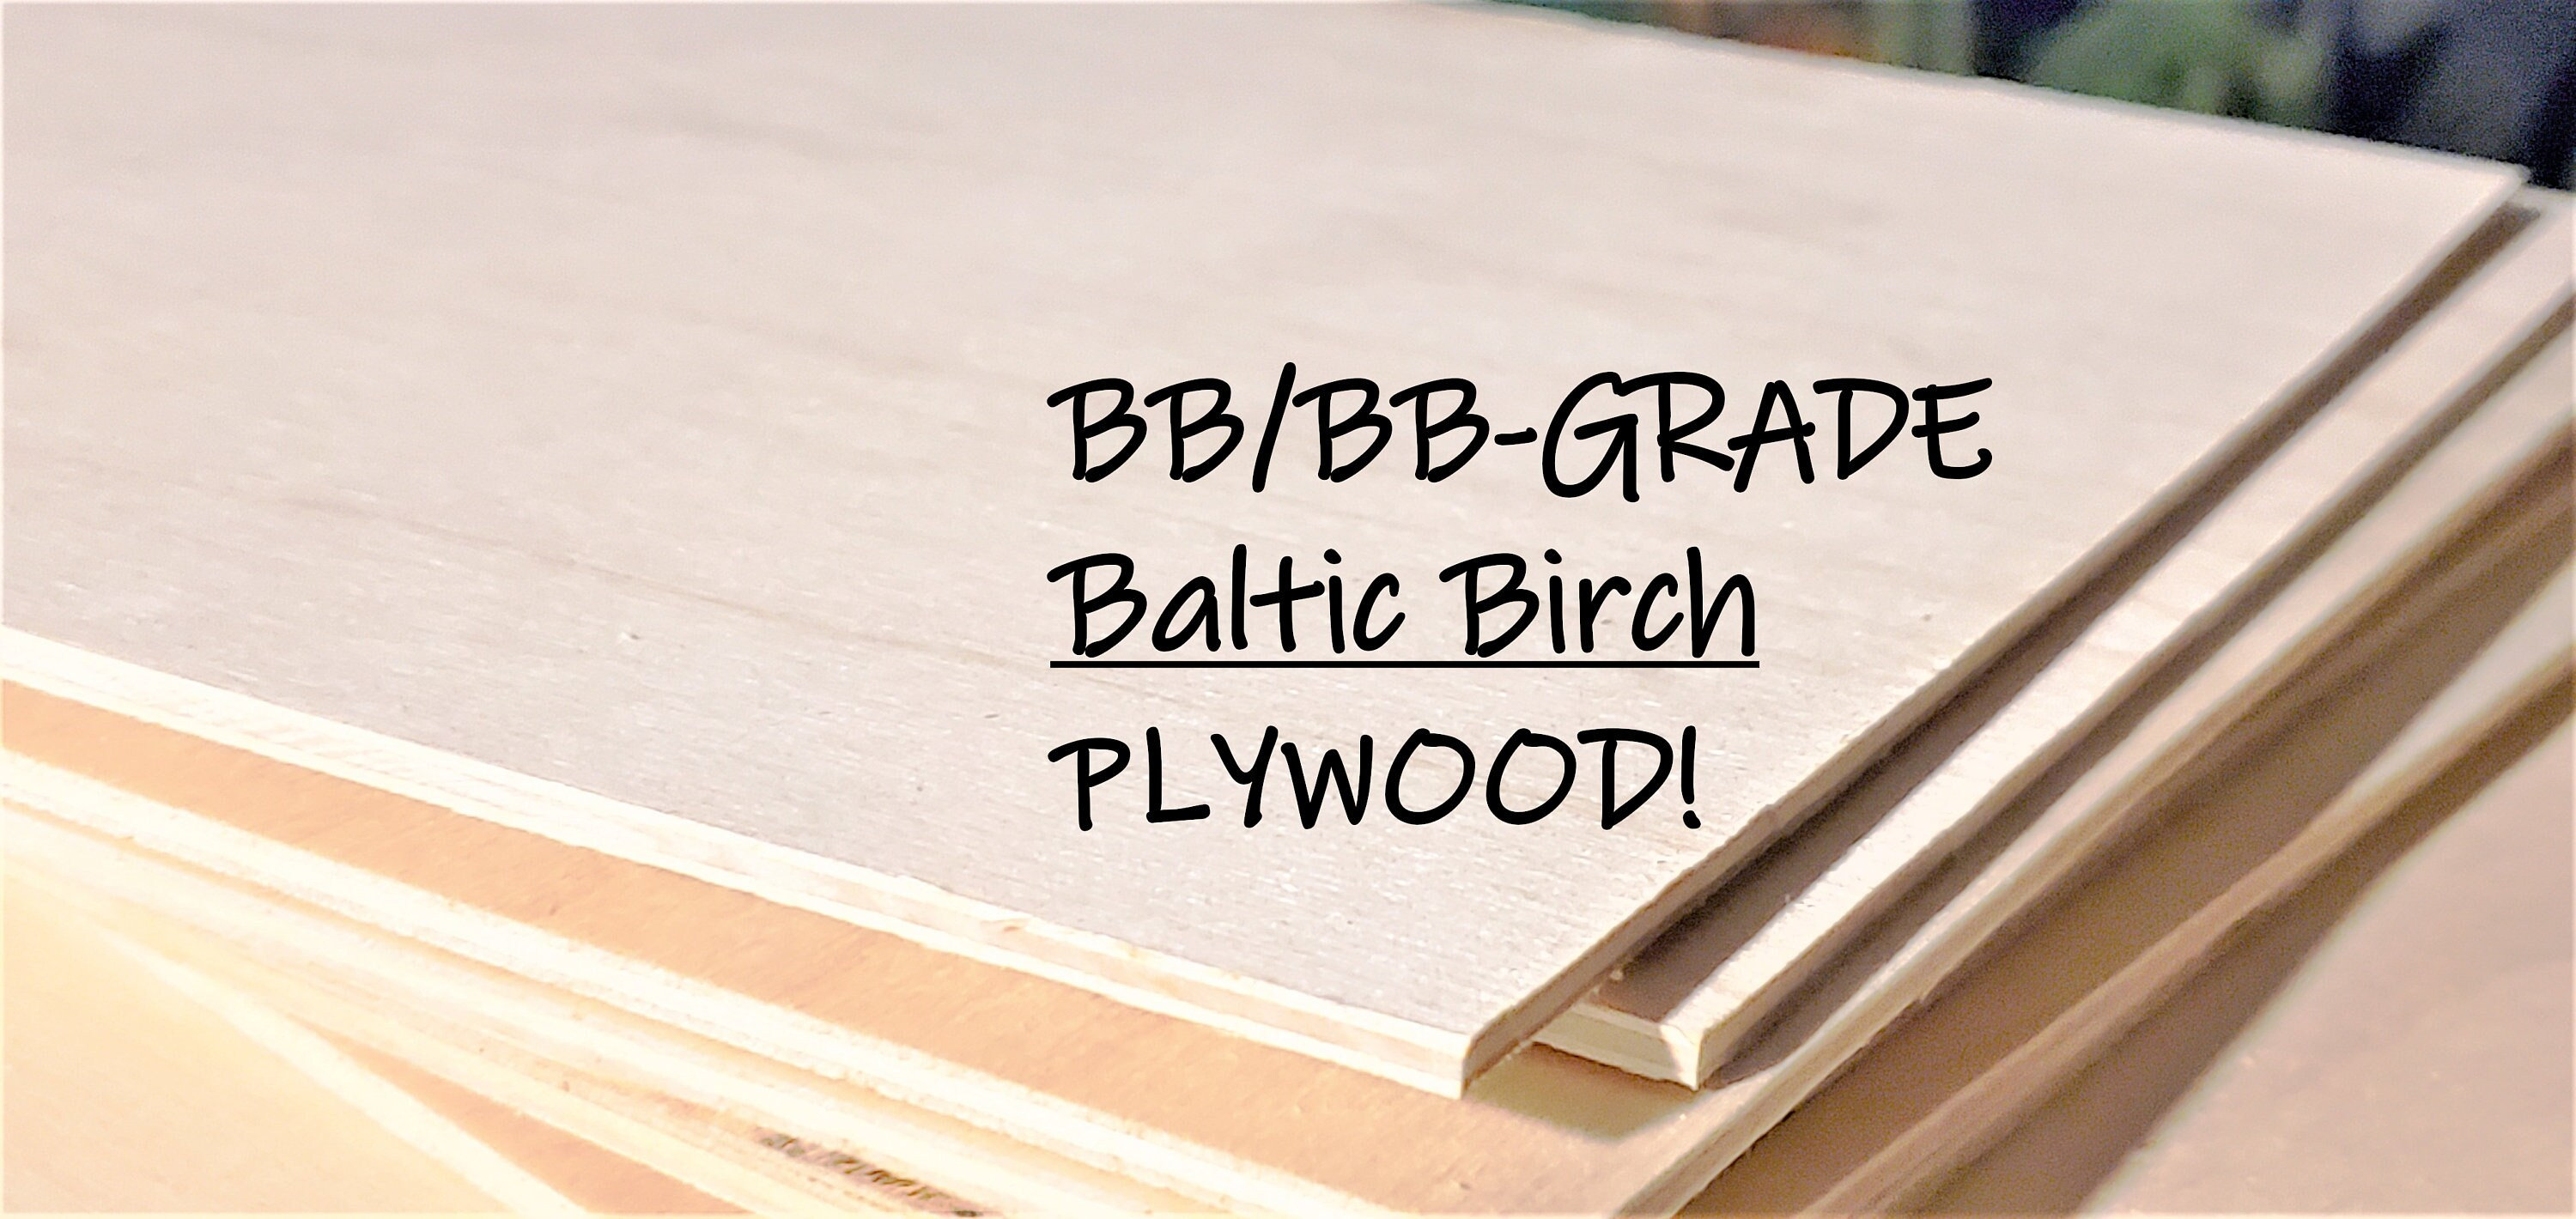 Mandala Crafts Baltic Birch Plywood Board 3x5 Inches - 16 Thin Wood Sheets for Crafting Model Laser Cutting Engraving - Unfinished Wood for Wood